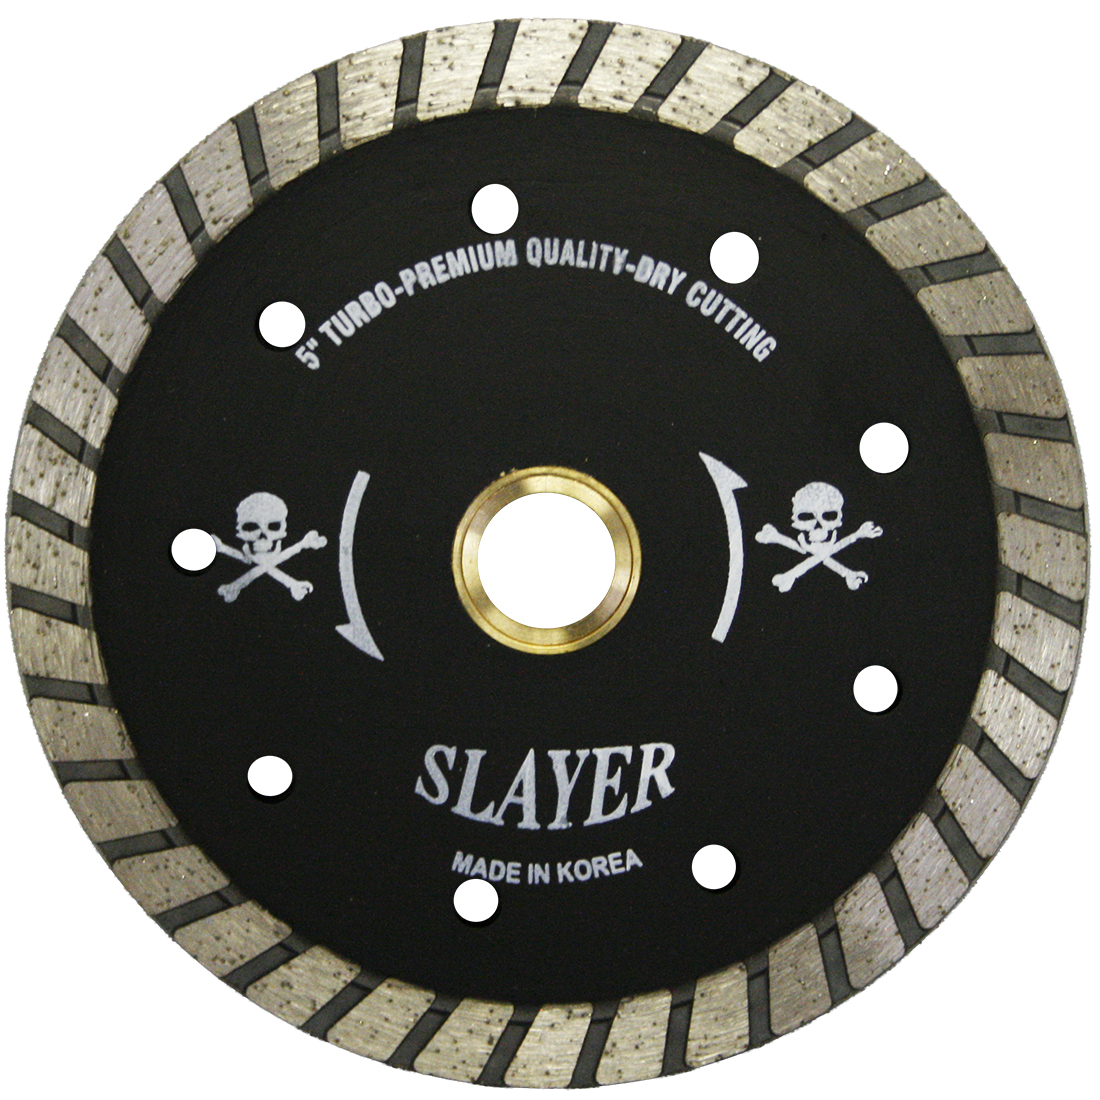 4 1/2 Inch Slayer Continuous Rim Blade With J-Slots For Stone 